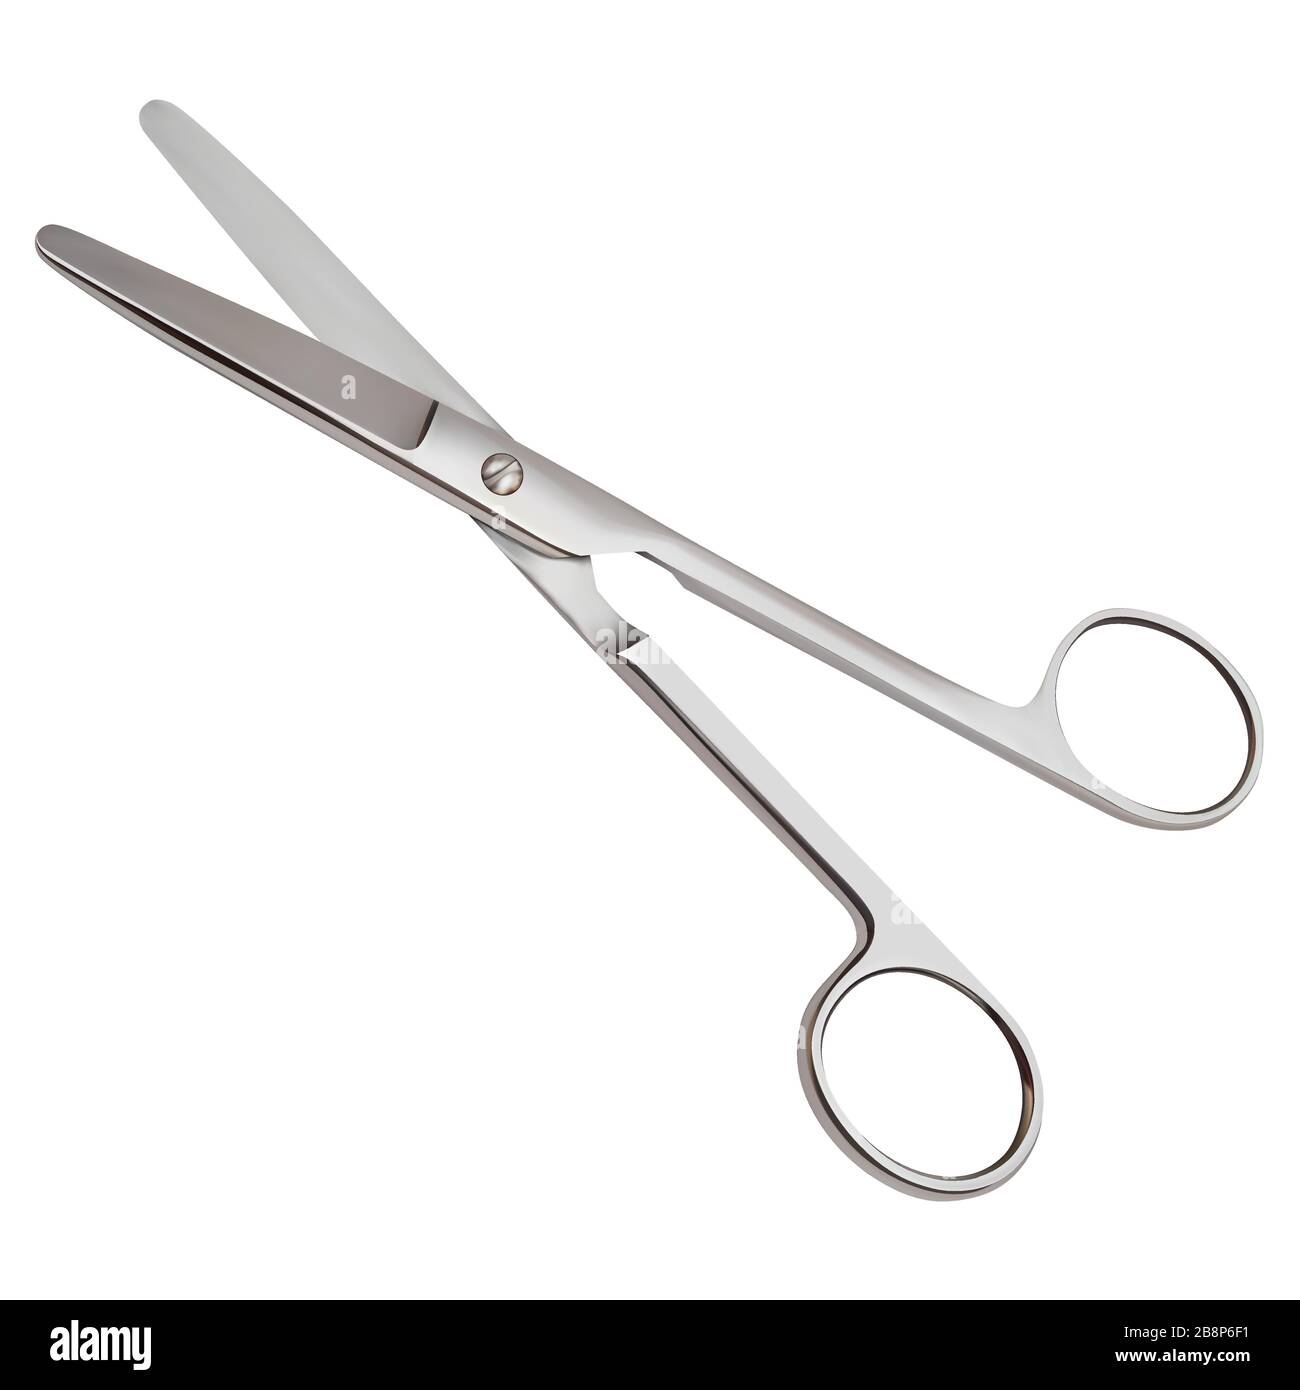 Blunt-pointed articulated scissors for dissecting and separating the skin and subcutaneous flap, cutting tissue in shallow wounds, parietal pleura Stock Vector